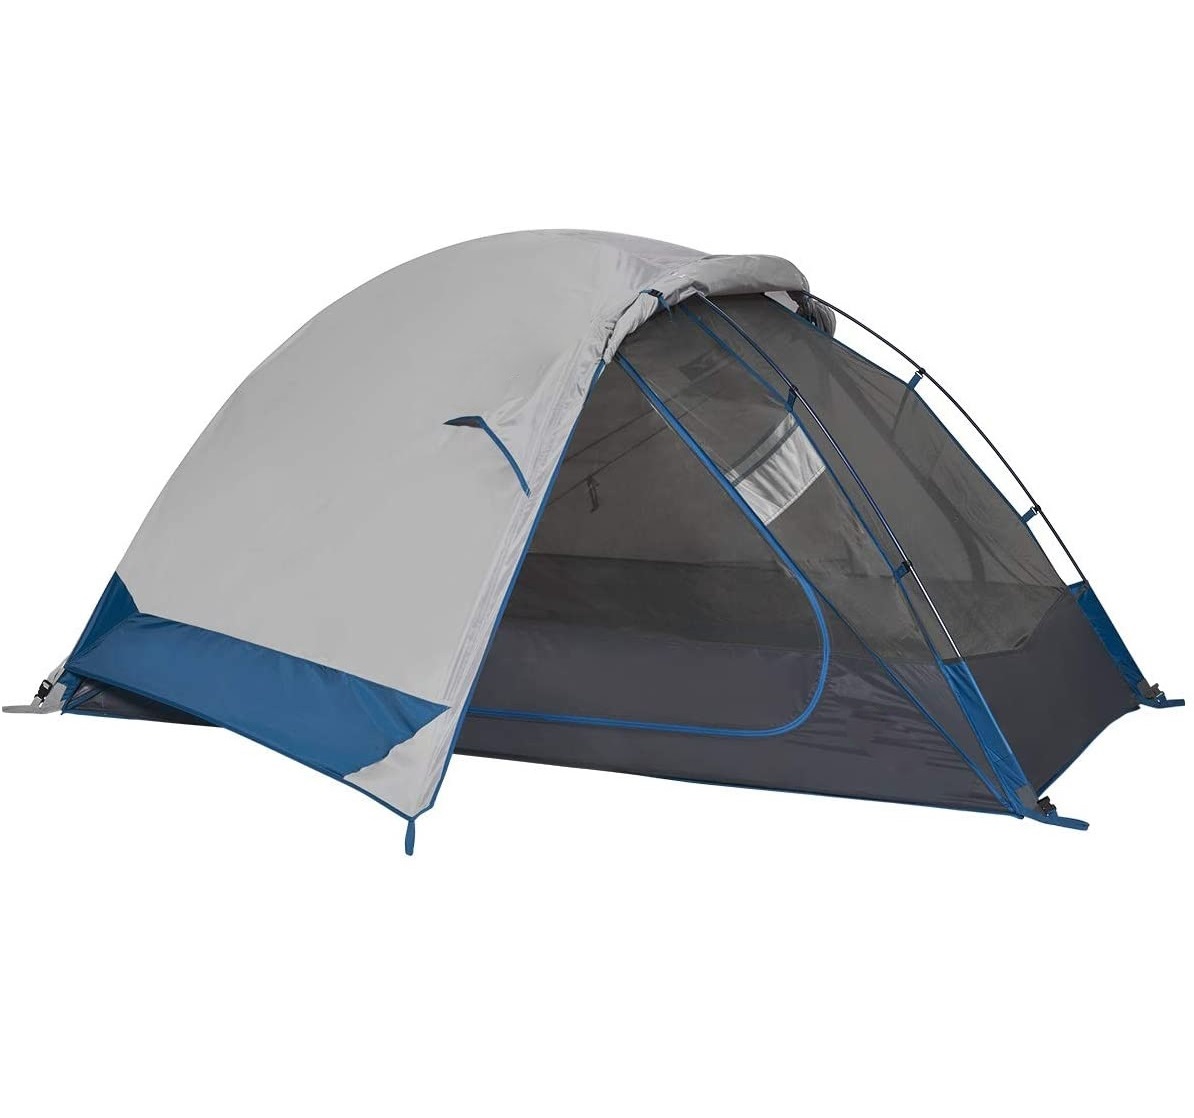 Stargazing Backpacking Tent For Stargazers & Night Camper